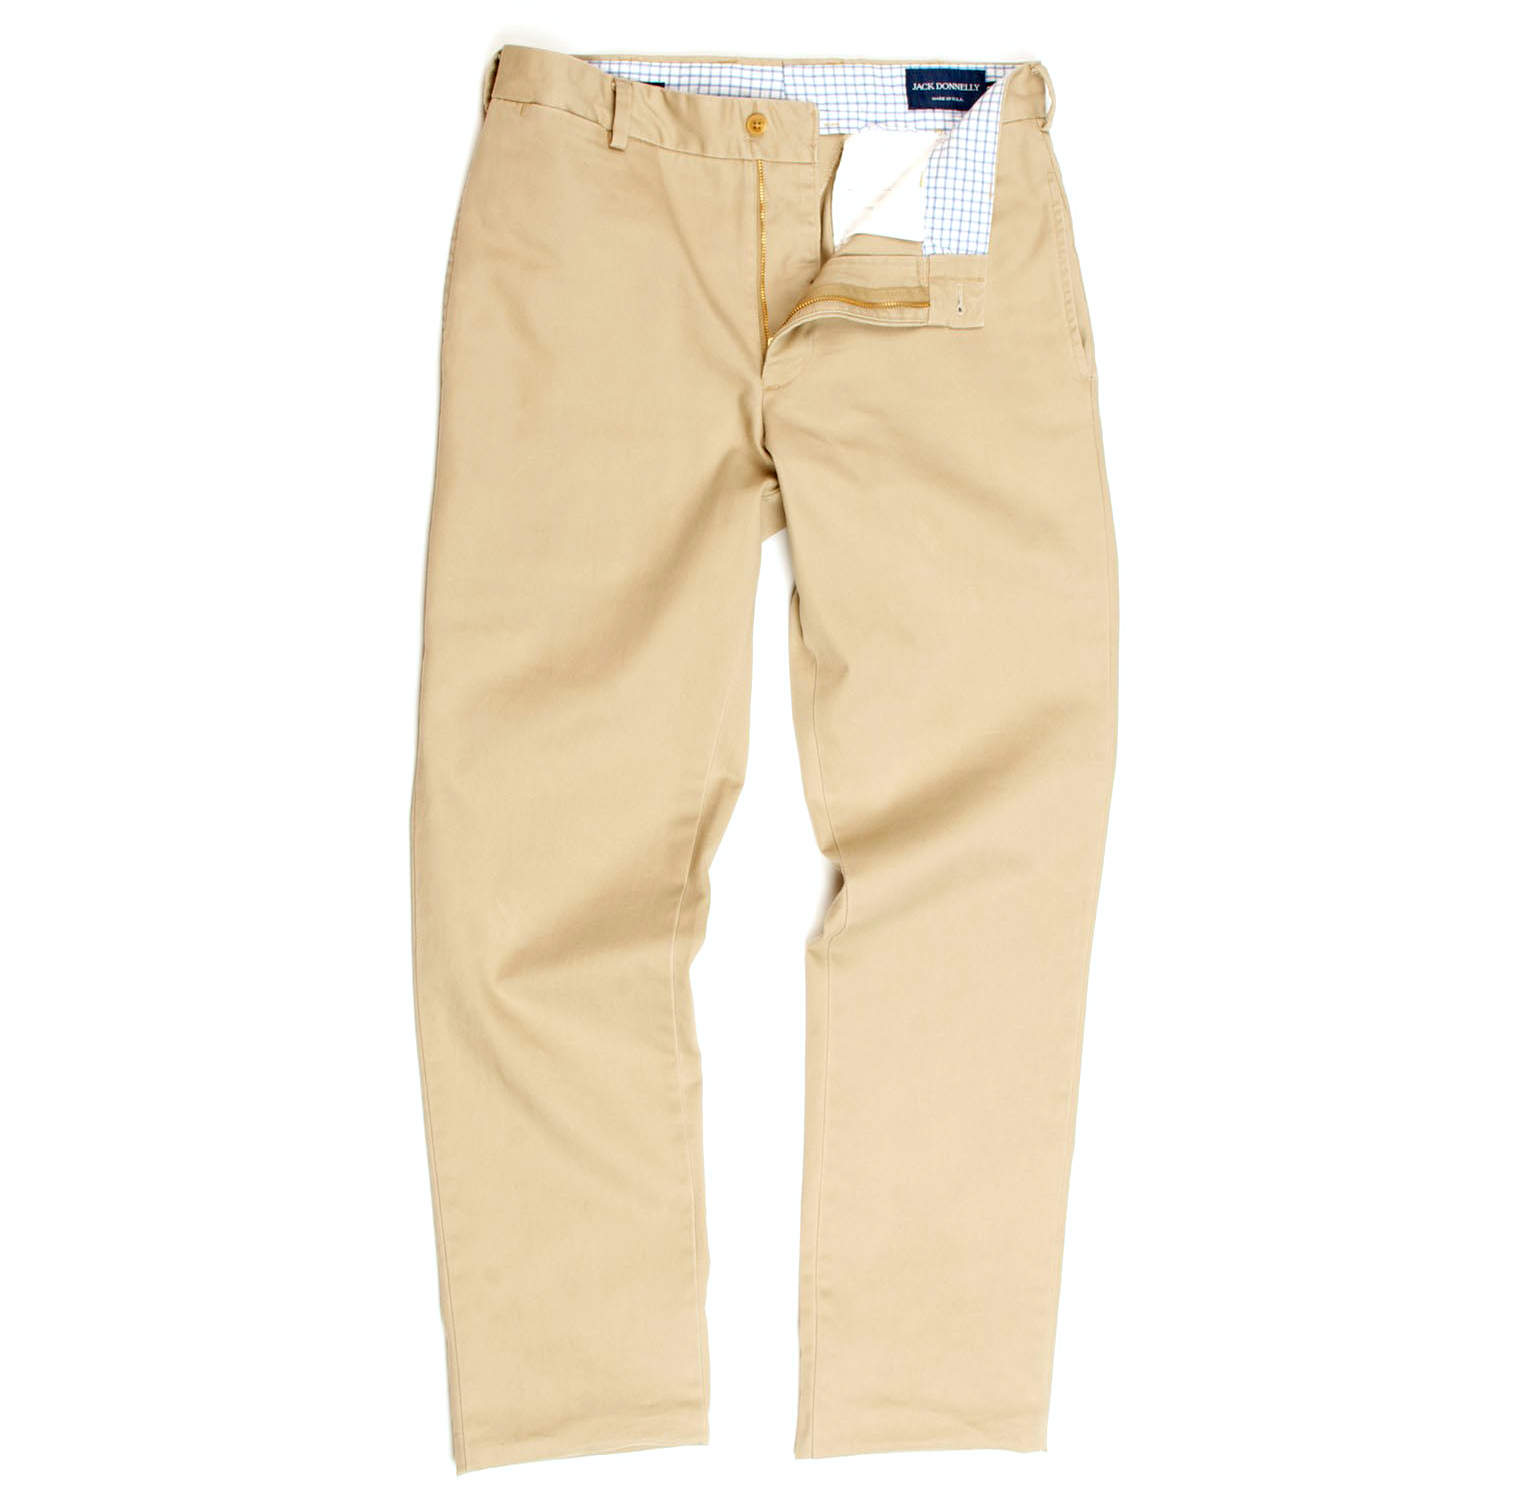 Salt Water New England: New! Jack Donnelly Cotton Poplins. And Mercer Shirt  Arrival...